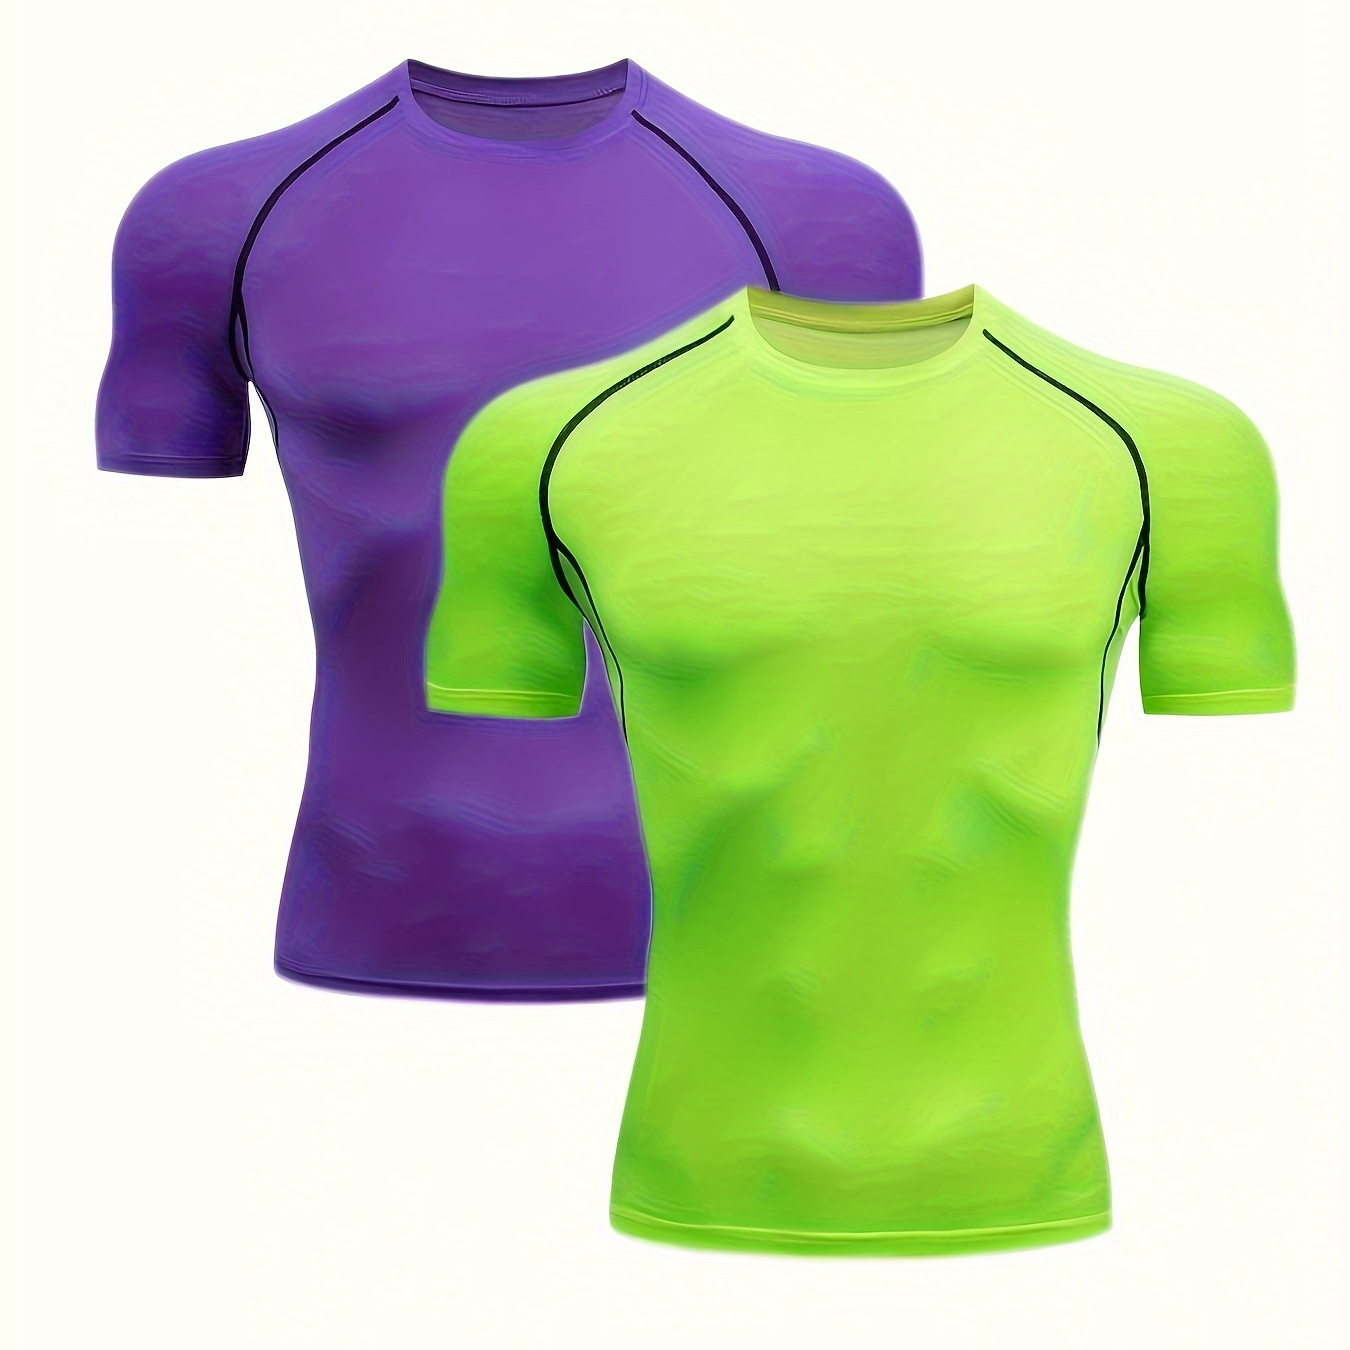 

2 Pack Men's Athletic Muscle Fit T-shirts, Men's Compression T-shirts, Breathable And High Elastic For Running, Shaping, And Cycling